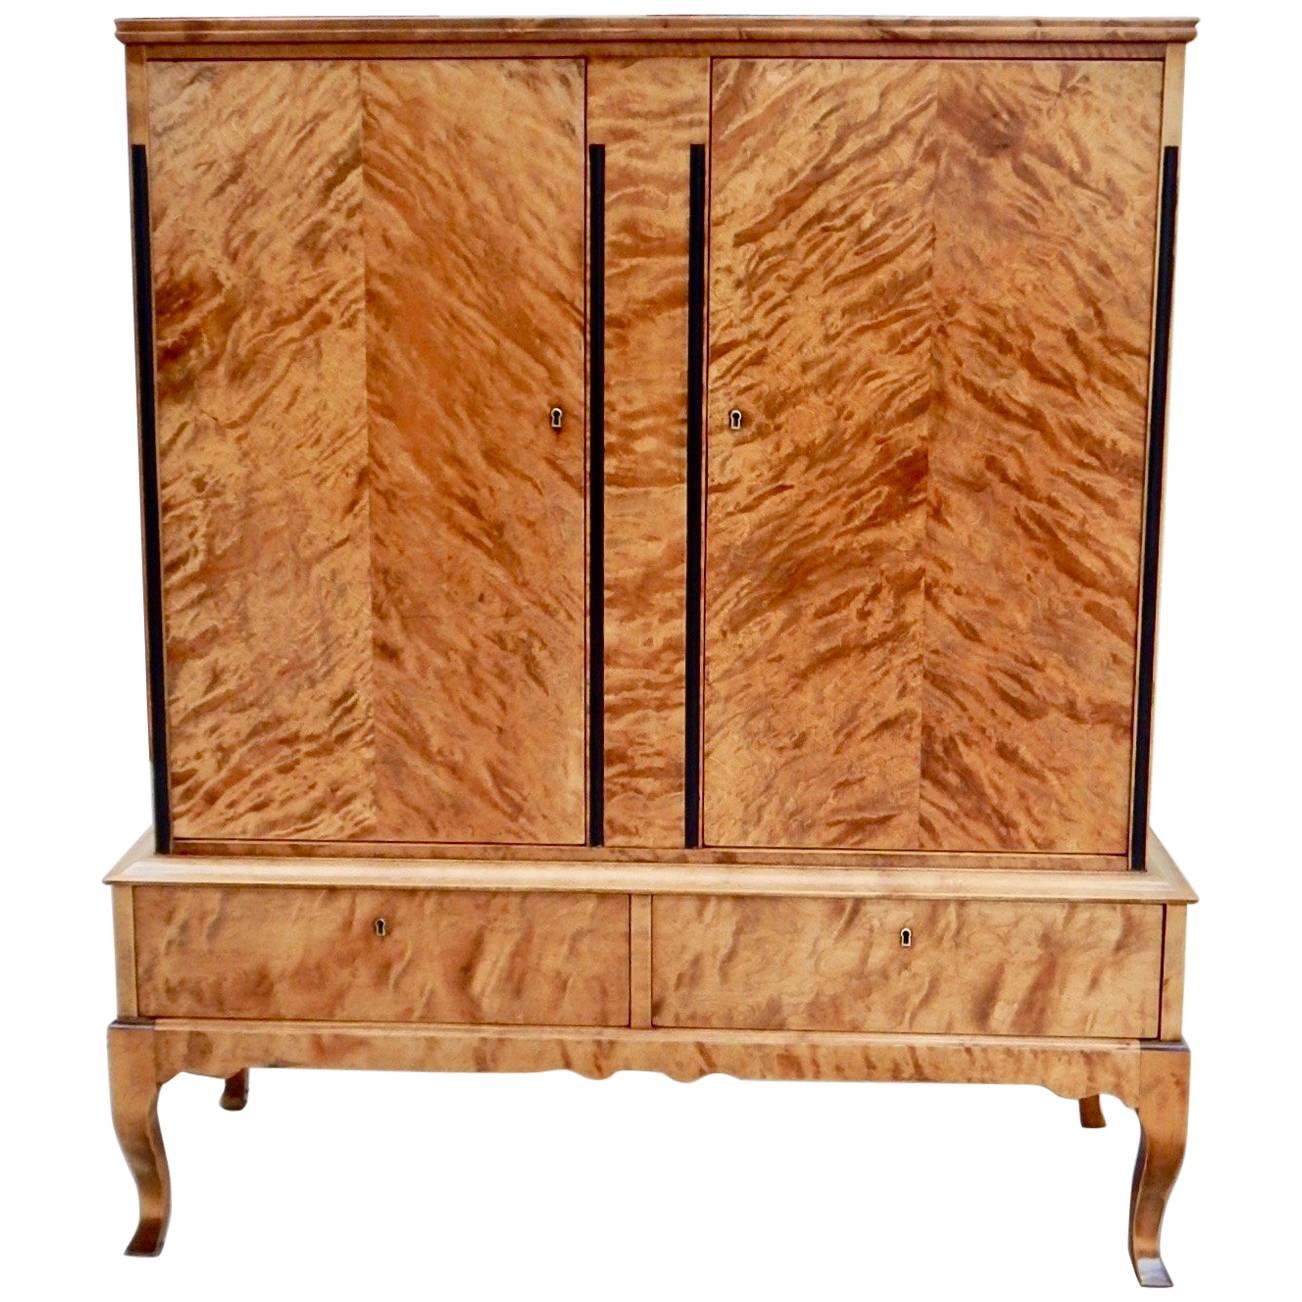 Swedish Art Deco era Biedermeier revival storage cabinet. Rendered in highly figured golden flame birch wood. With two adjustable and removable shelves. With two exterior drawers with dovetailed joinery. With original key. This item has just been